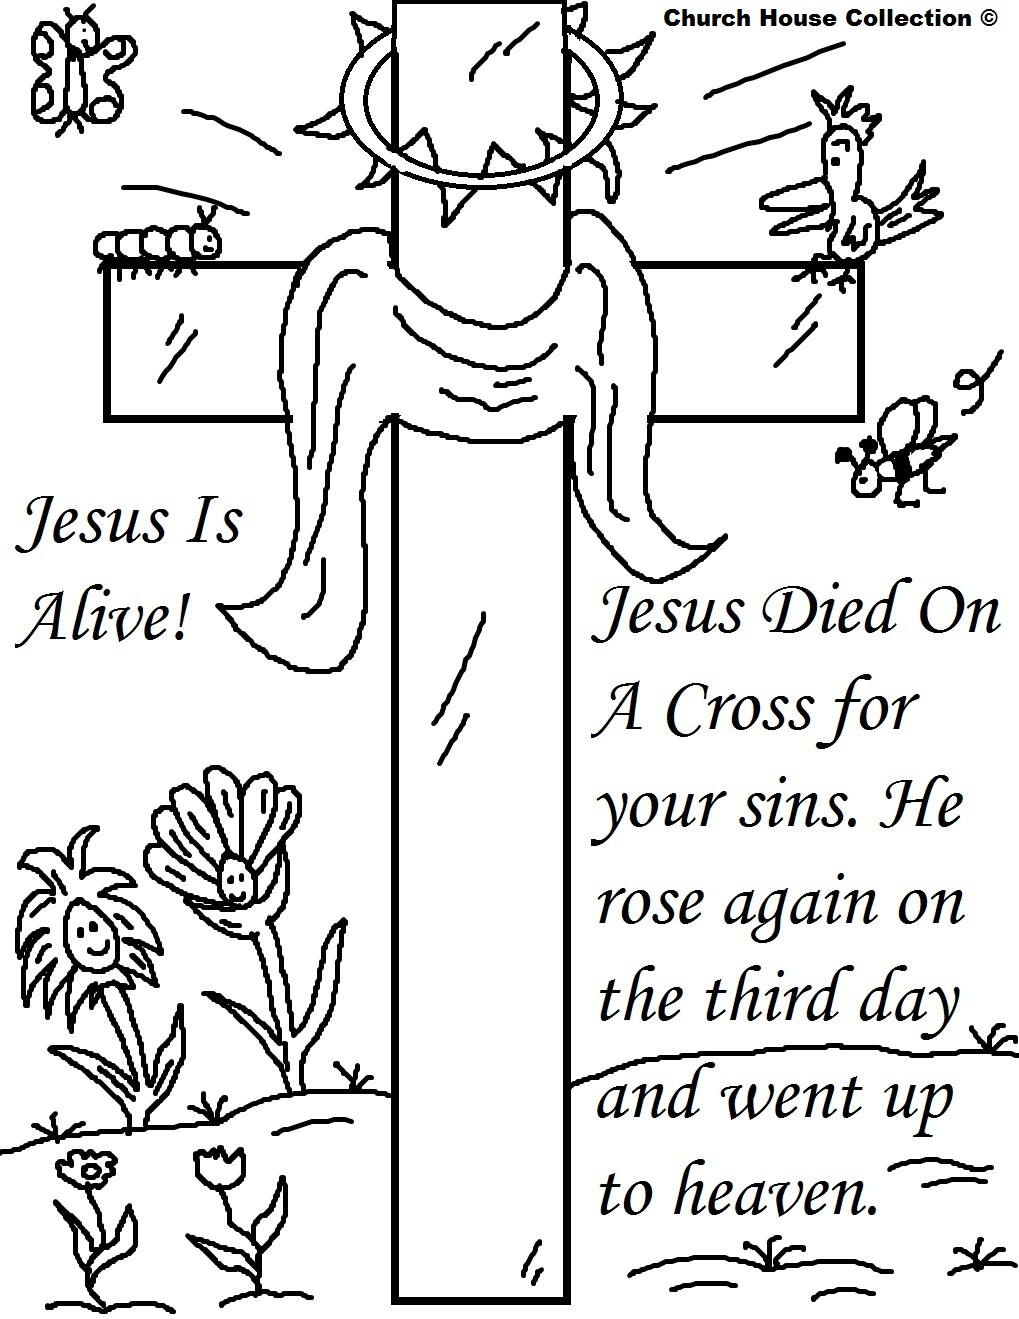 25 Religious Easter Coloring Pages | Free Easter Activity Printables - Free Printable Easter Coloring Pages